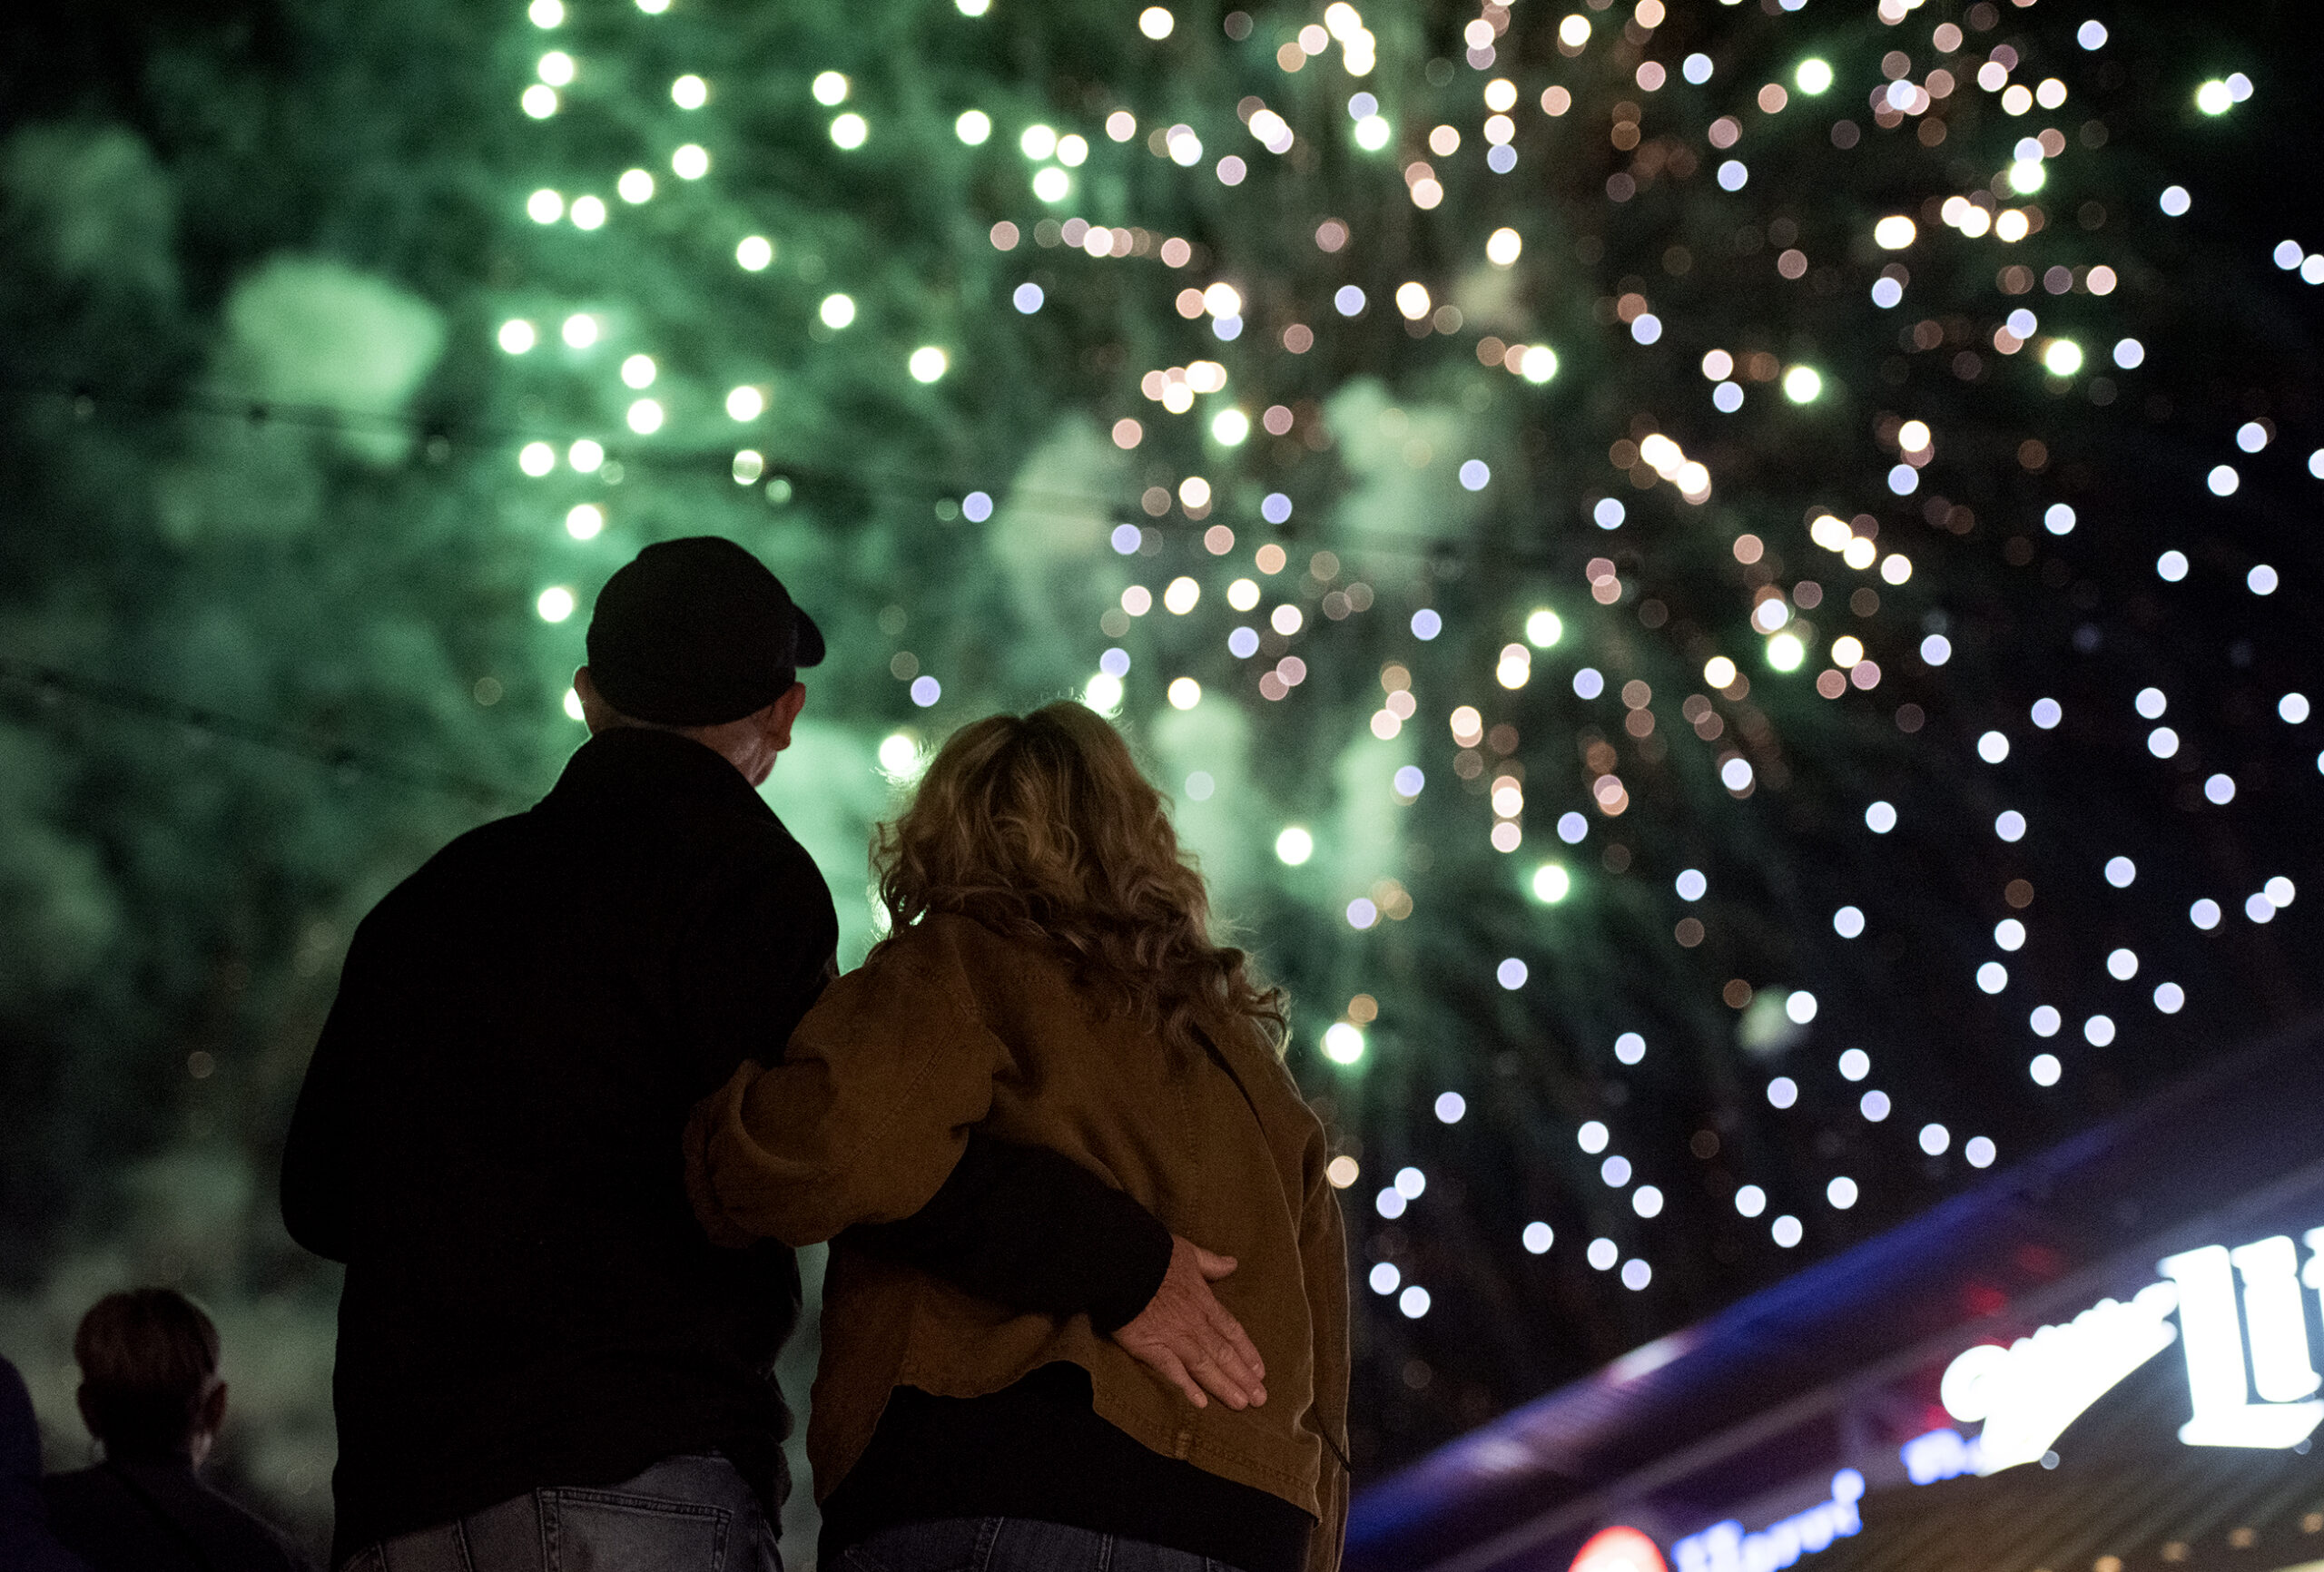 Green fireworks explode in the sky as a couple watches from the ground.